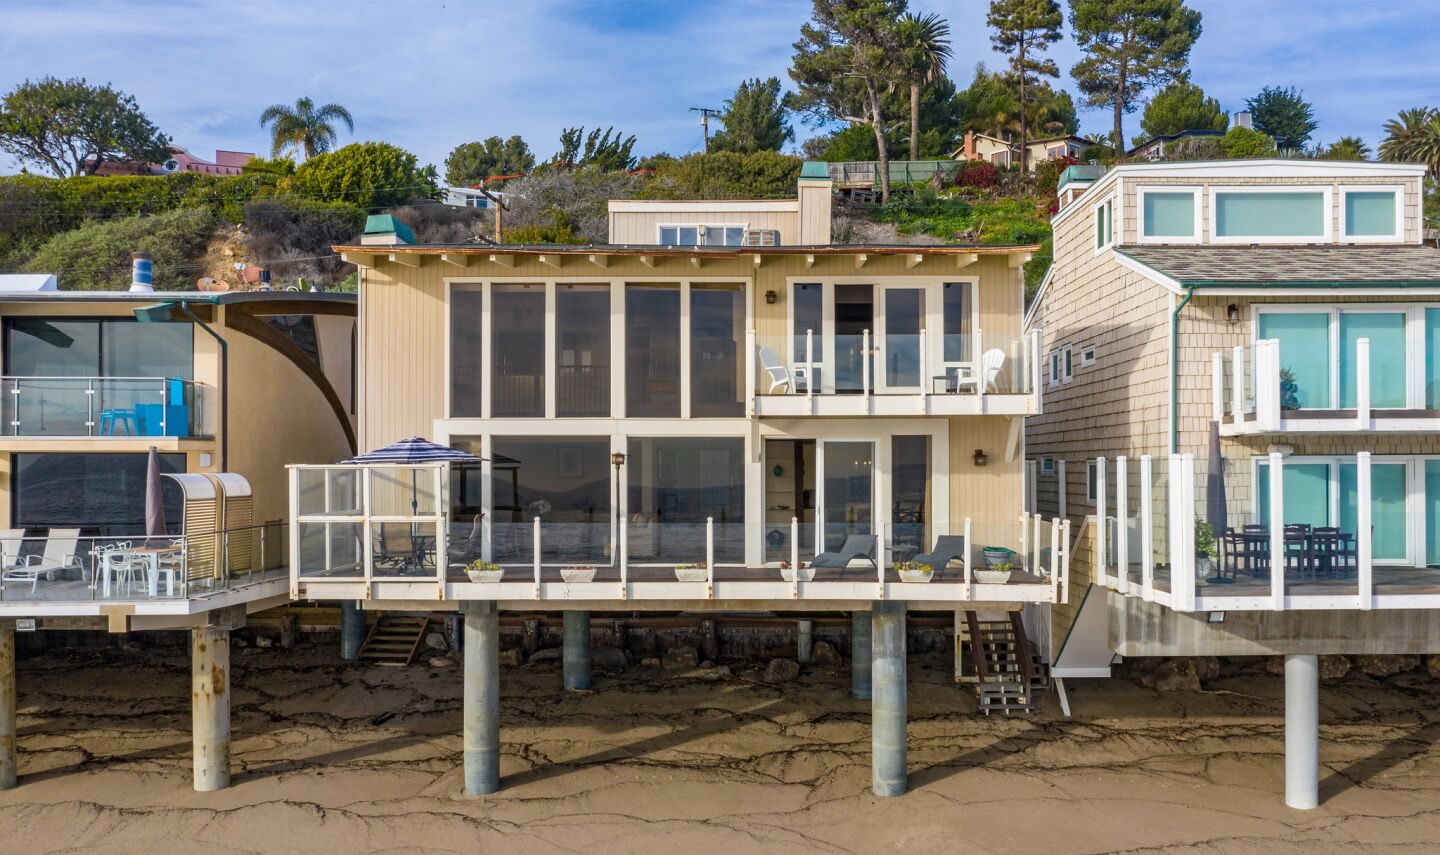 'Brady Bunch' star Barry Williams has put his two-story home in Malibu Cove Colony up for sale at $6.375 million.